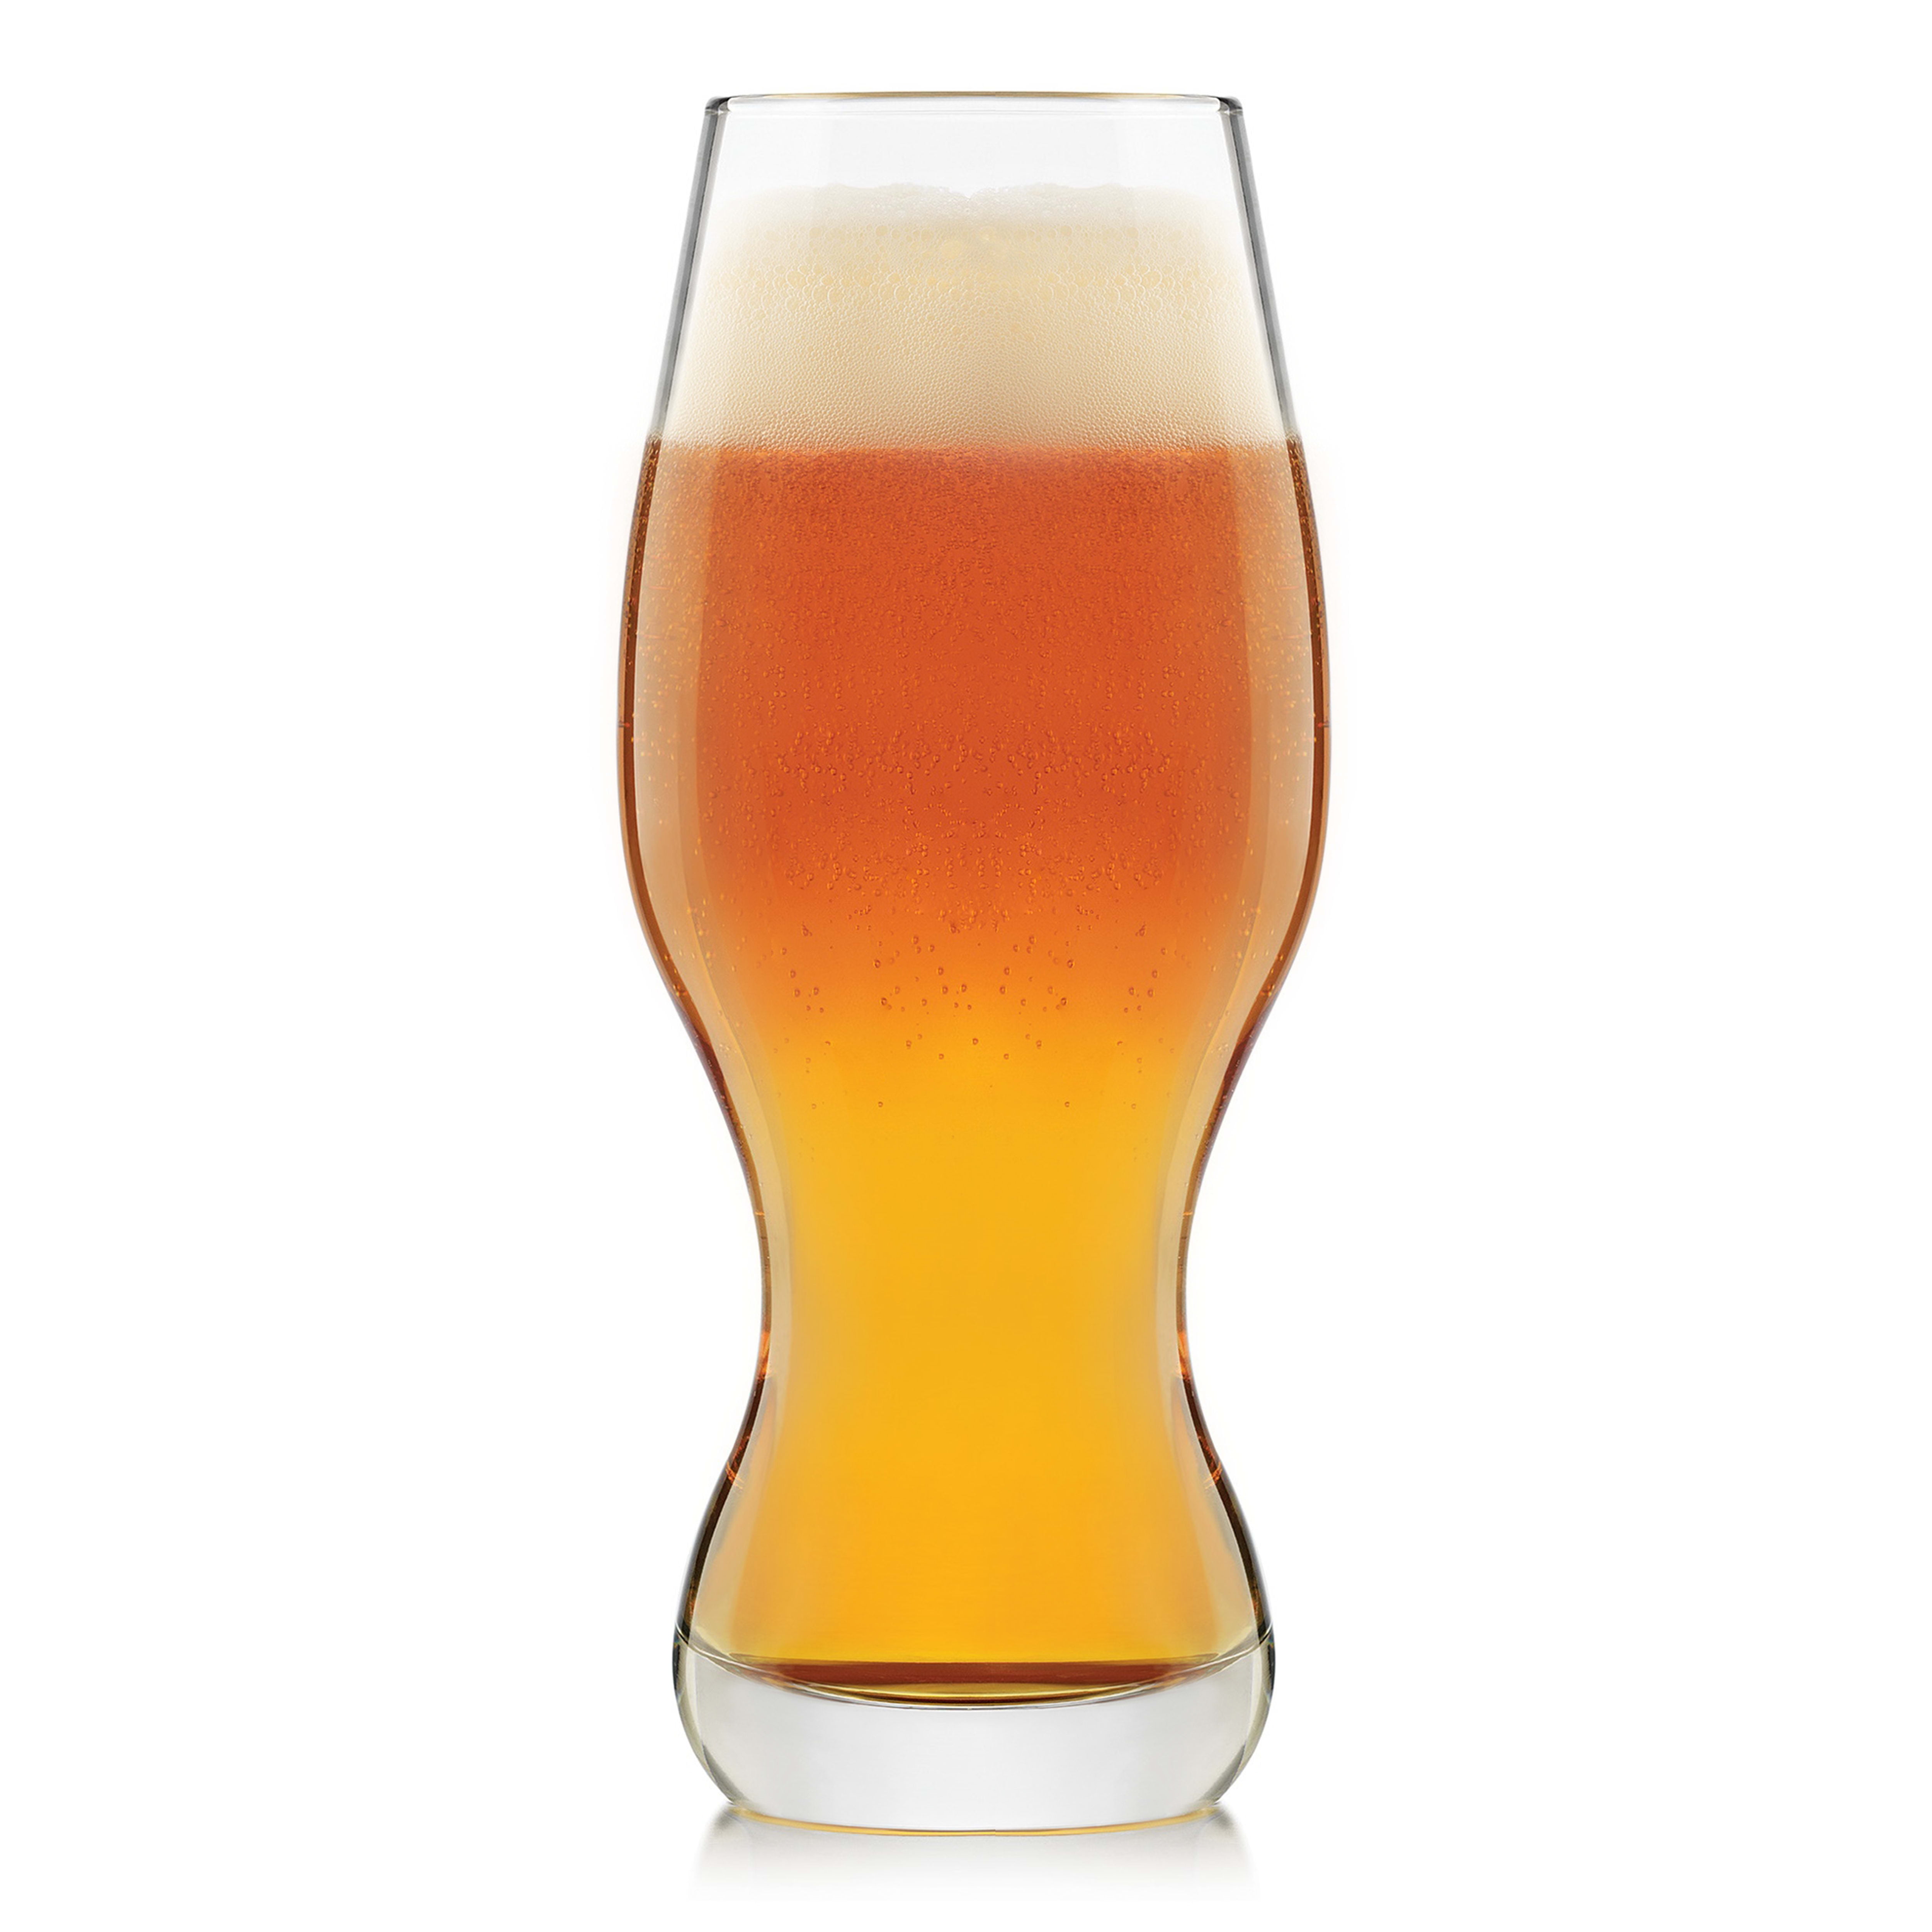 Libbey Craft Brews IPA Beer Glasses, 16-ounce, Set of 4 